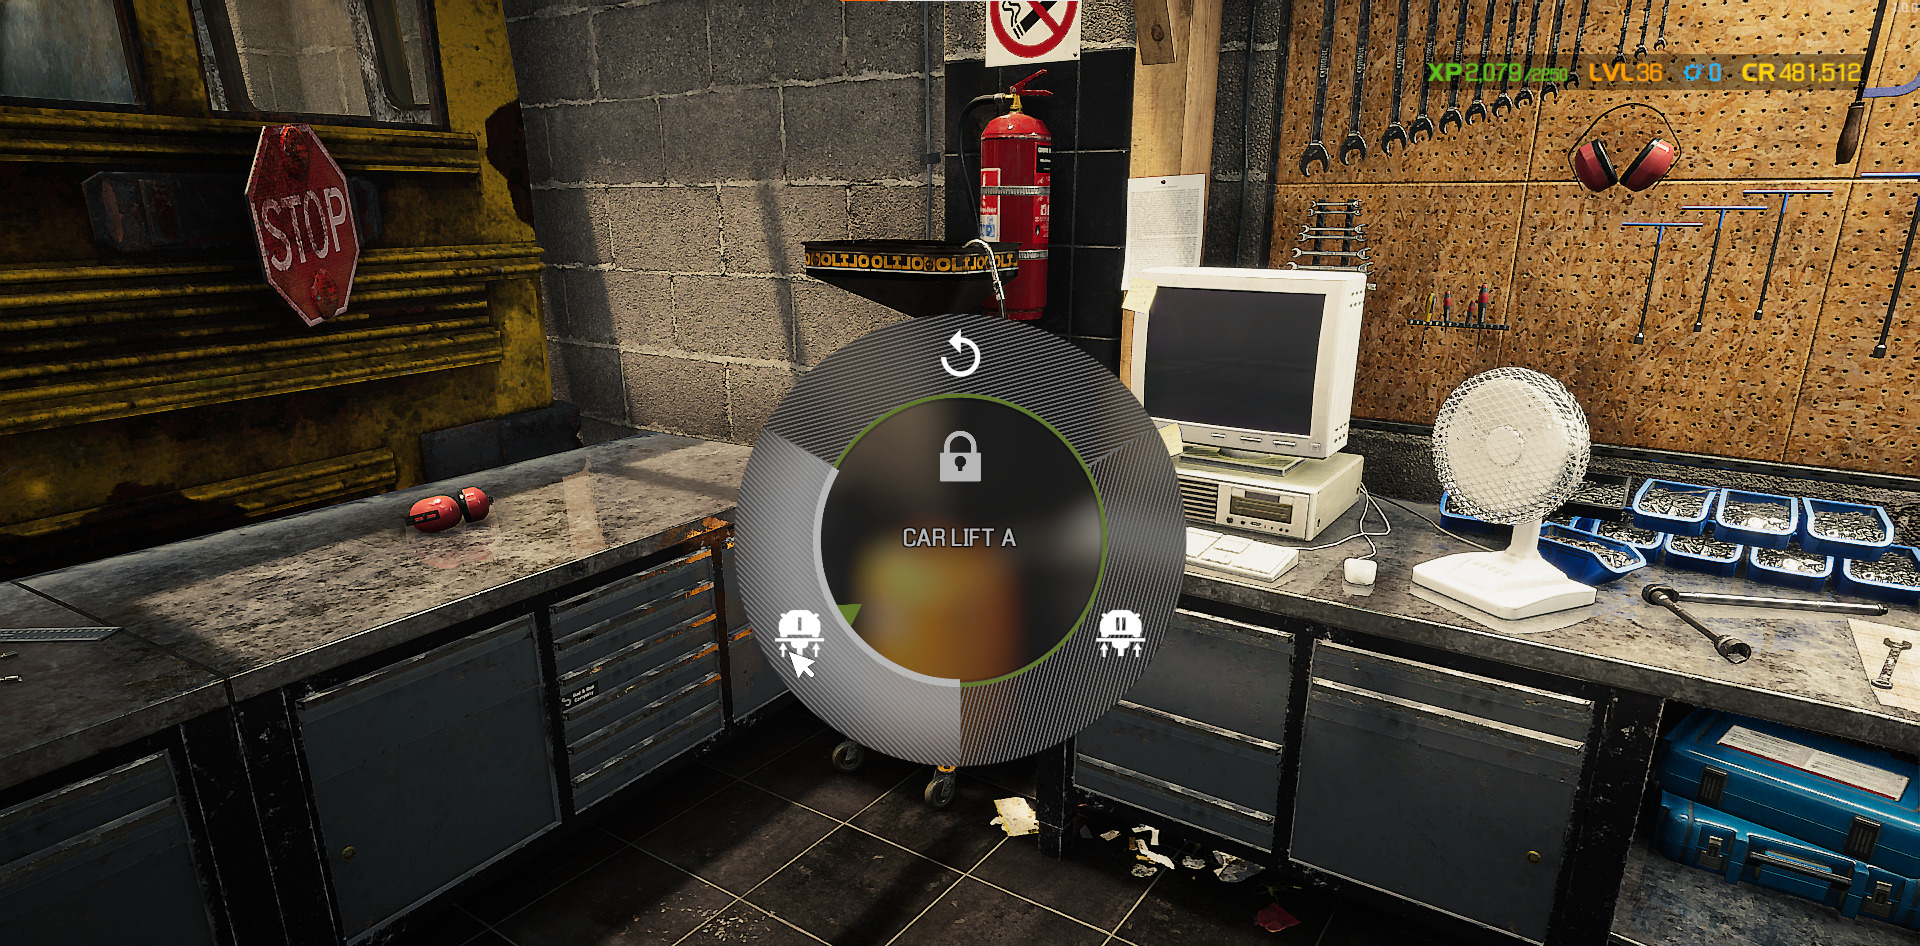 Move the Oil Drain Tool to the lift to drain the old oil from cars in Car Mechanic Simulator. 